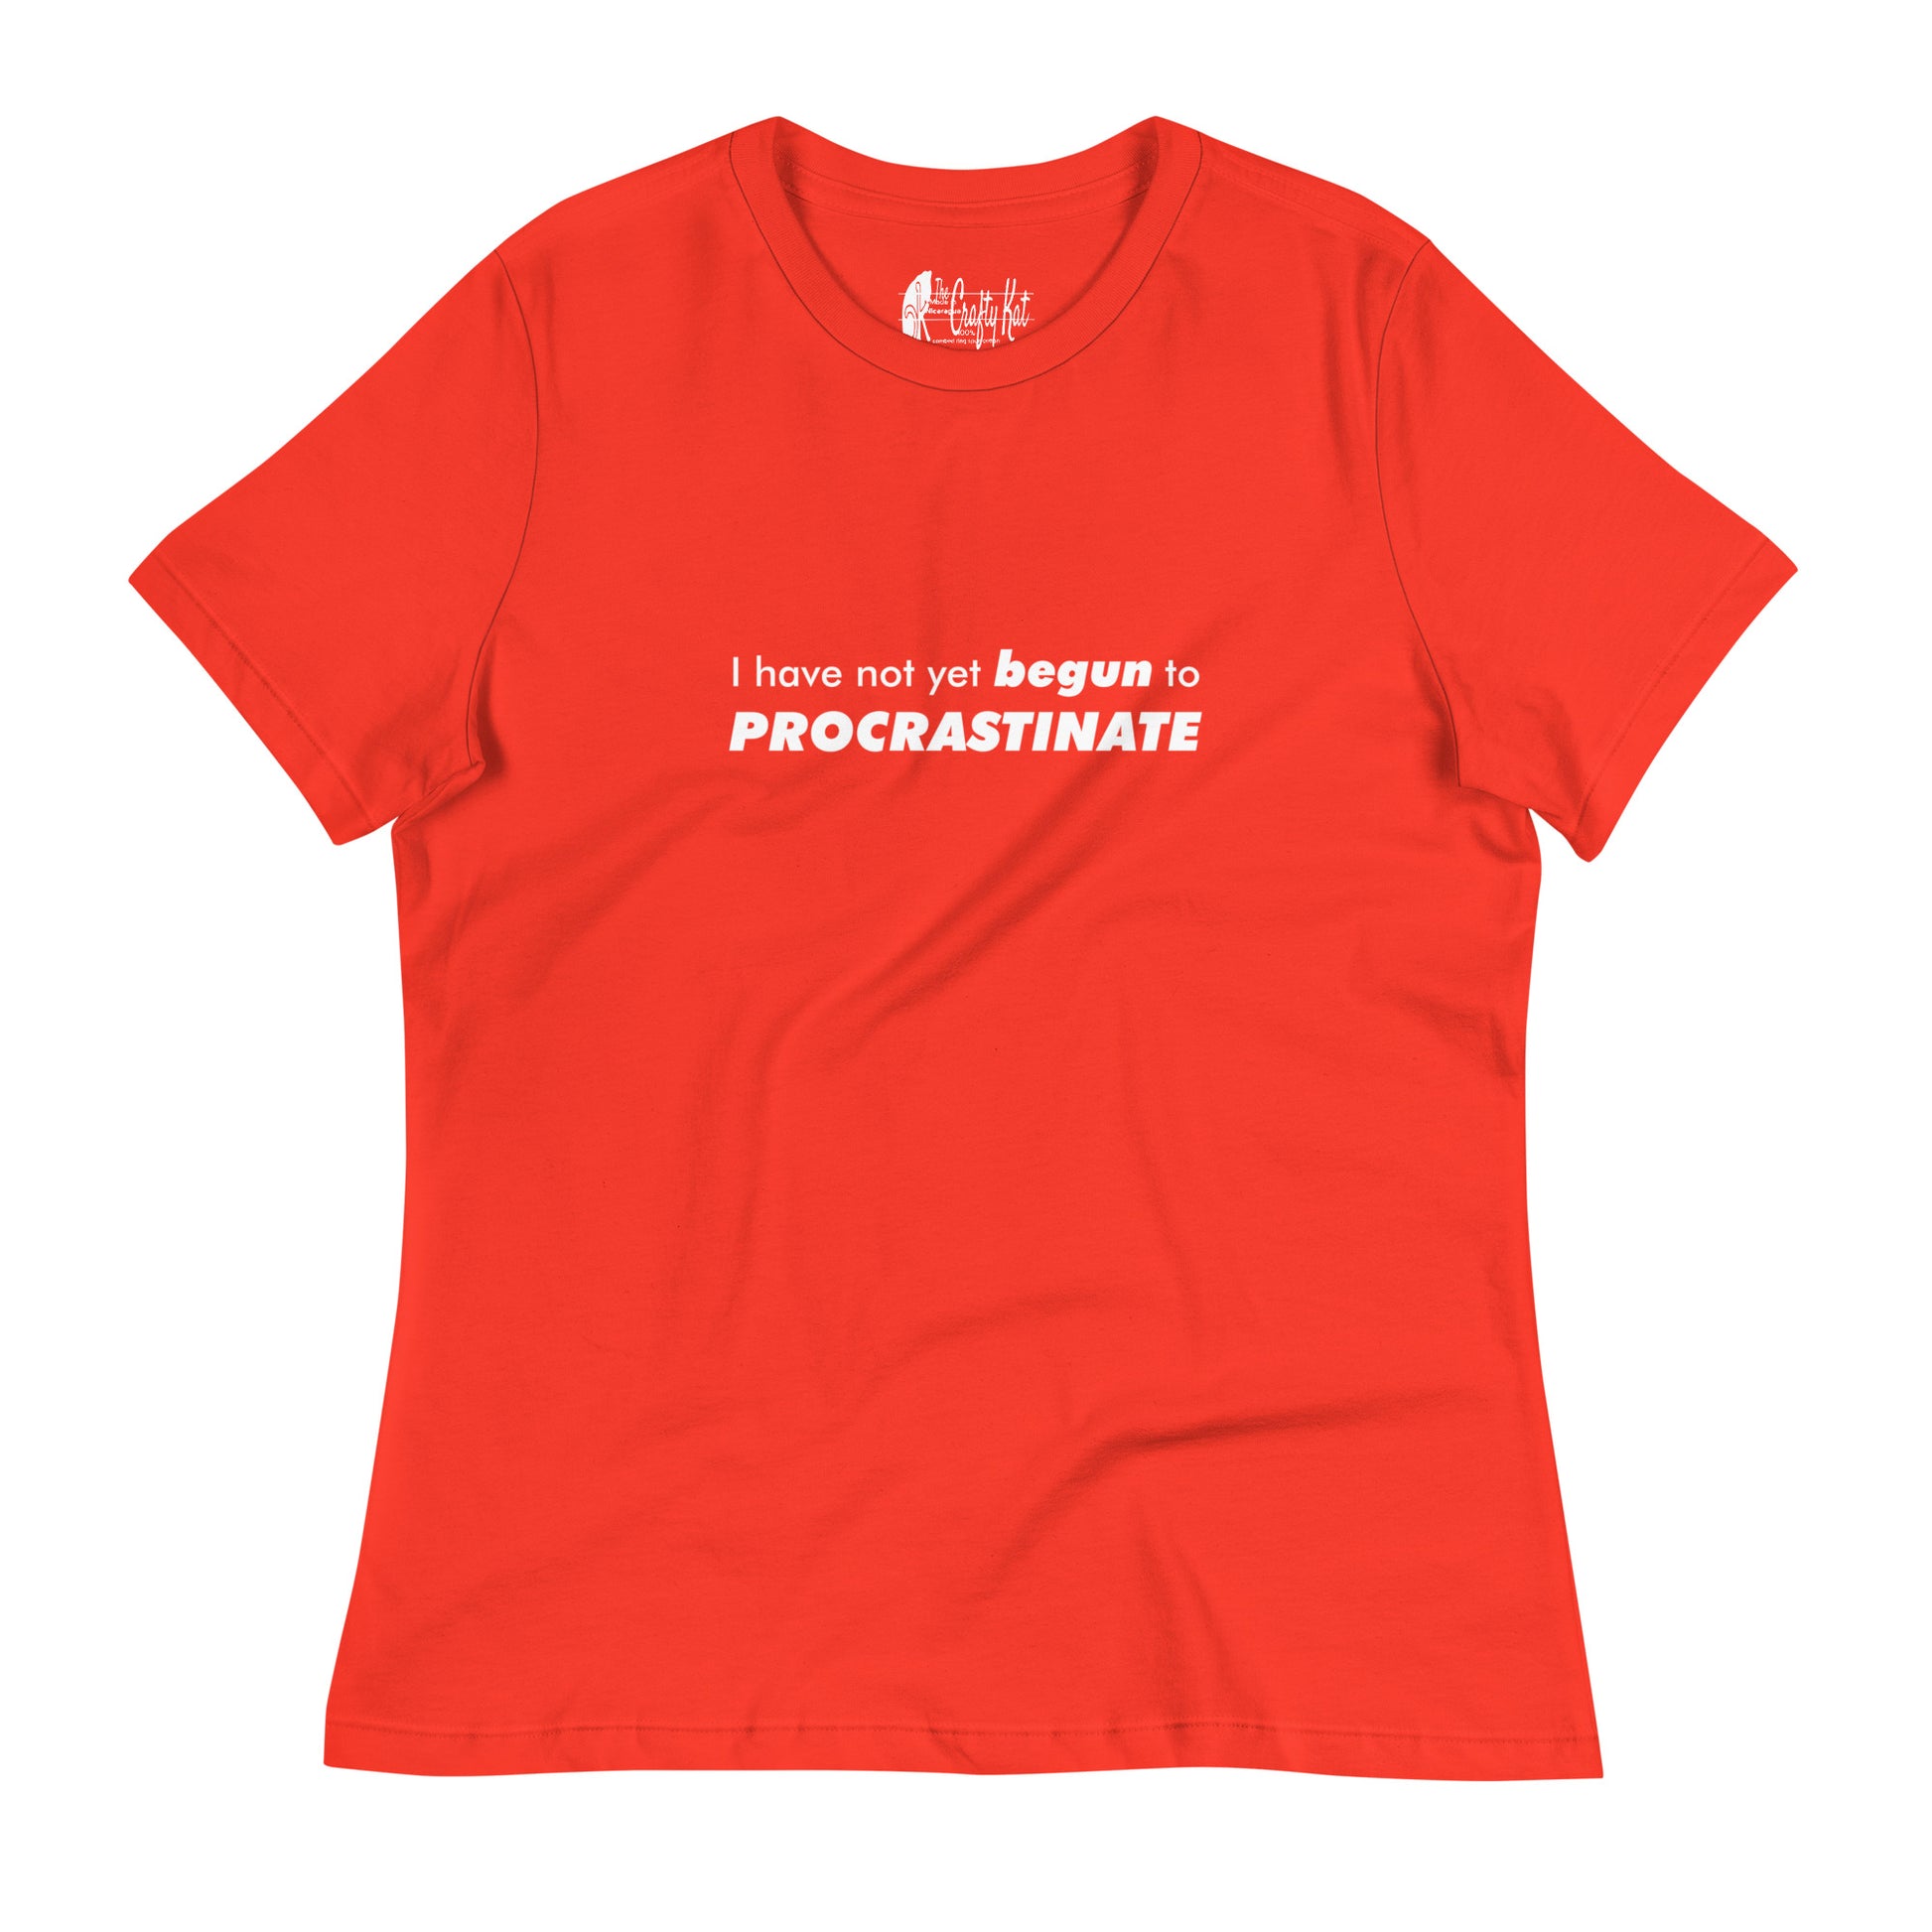 Poppy (bright red) women's relaxed-fit t-shirt with text graphic: "I have not yet BEGUN to PROCRASTINATE"